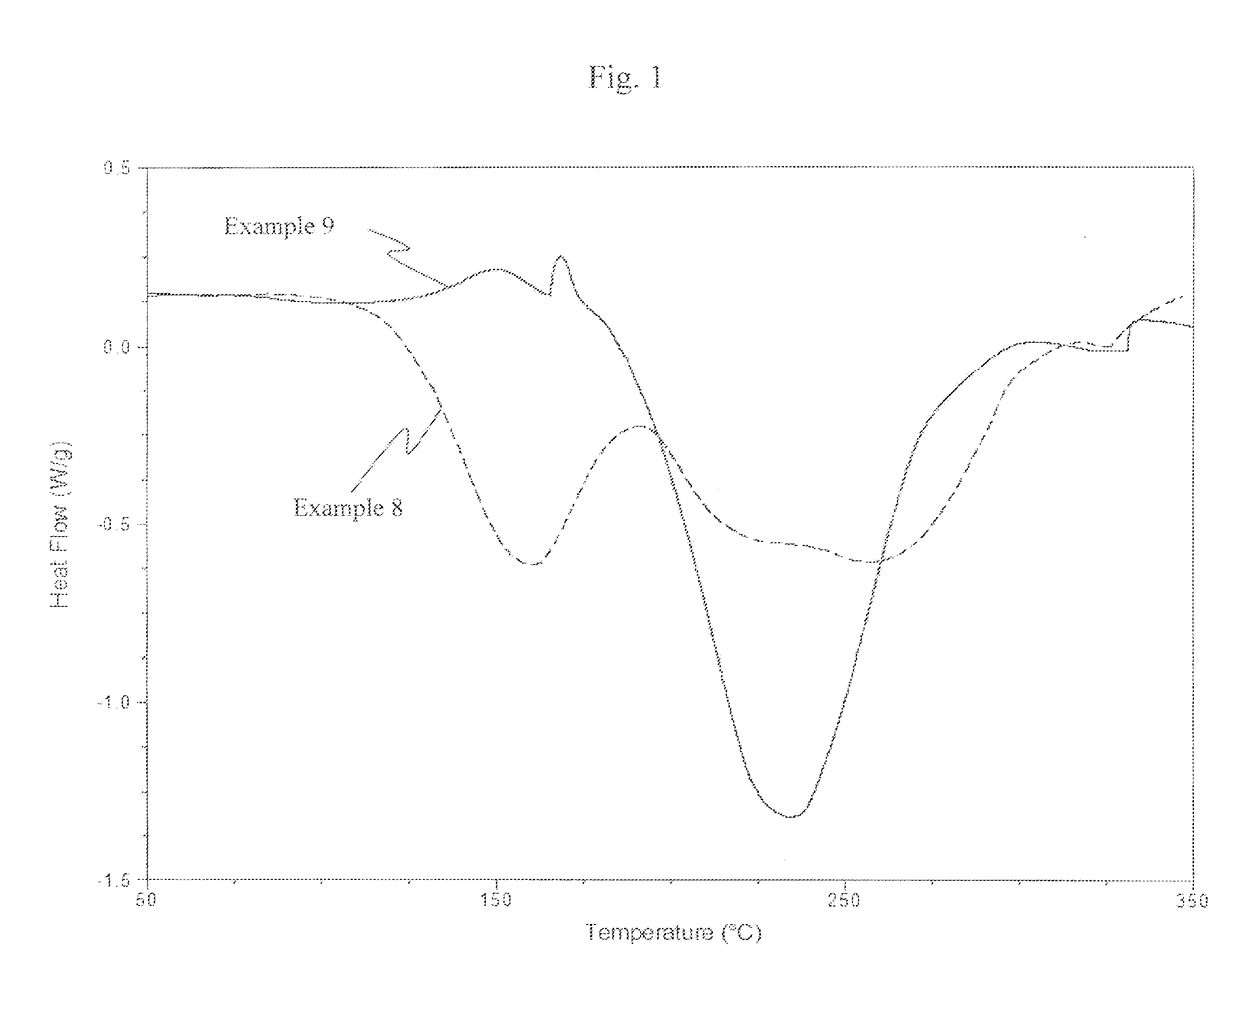 Epoxy resin compositions and fiber-reinforced composite materials prepared therefrom